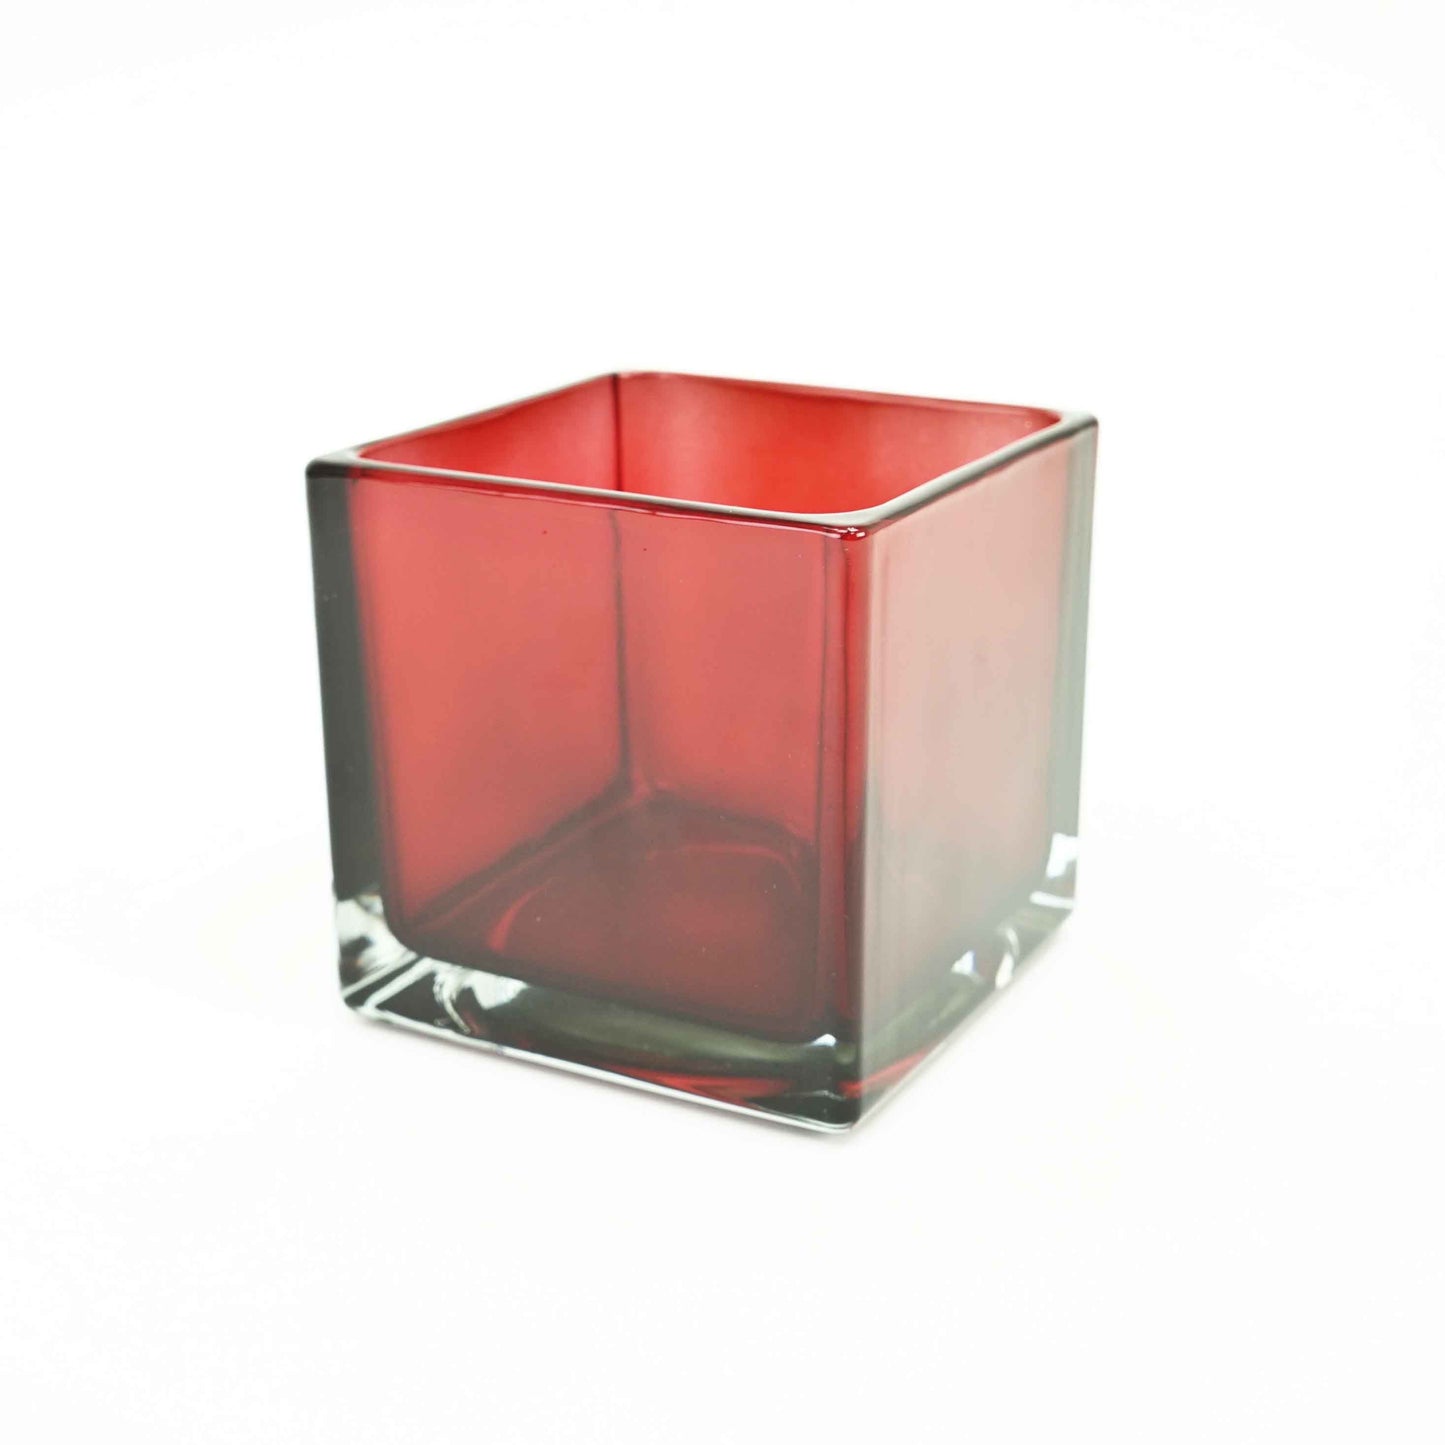 5" Glass Cube Vase - Red